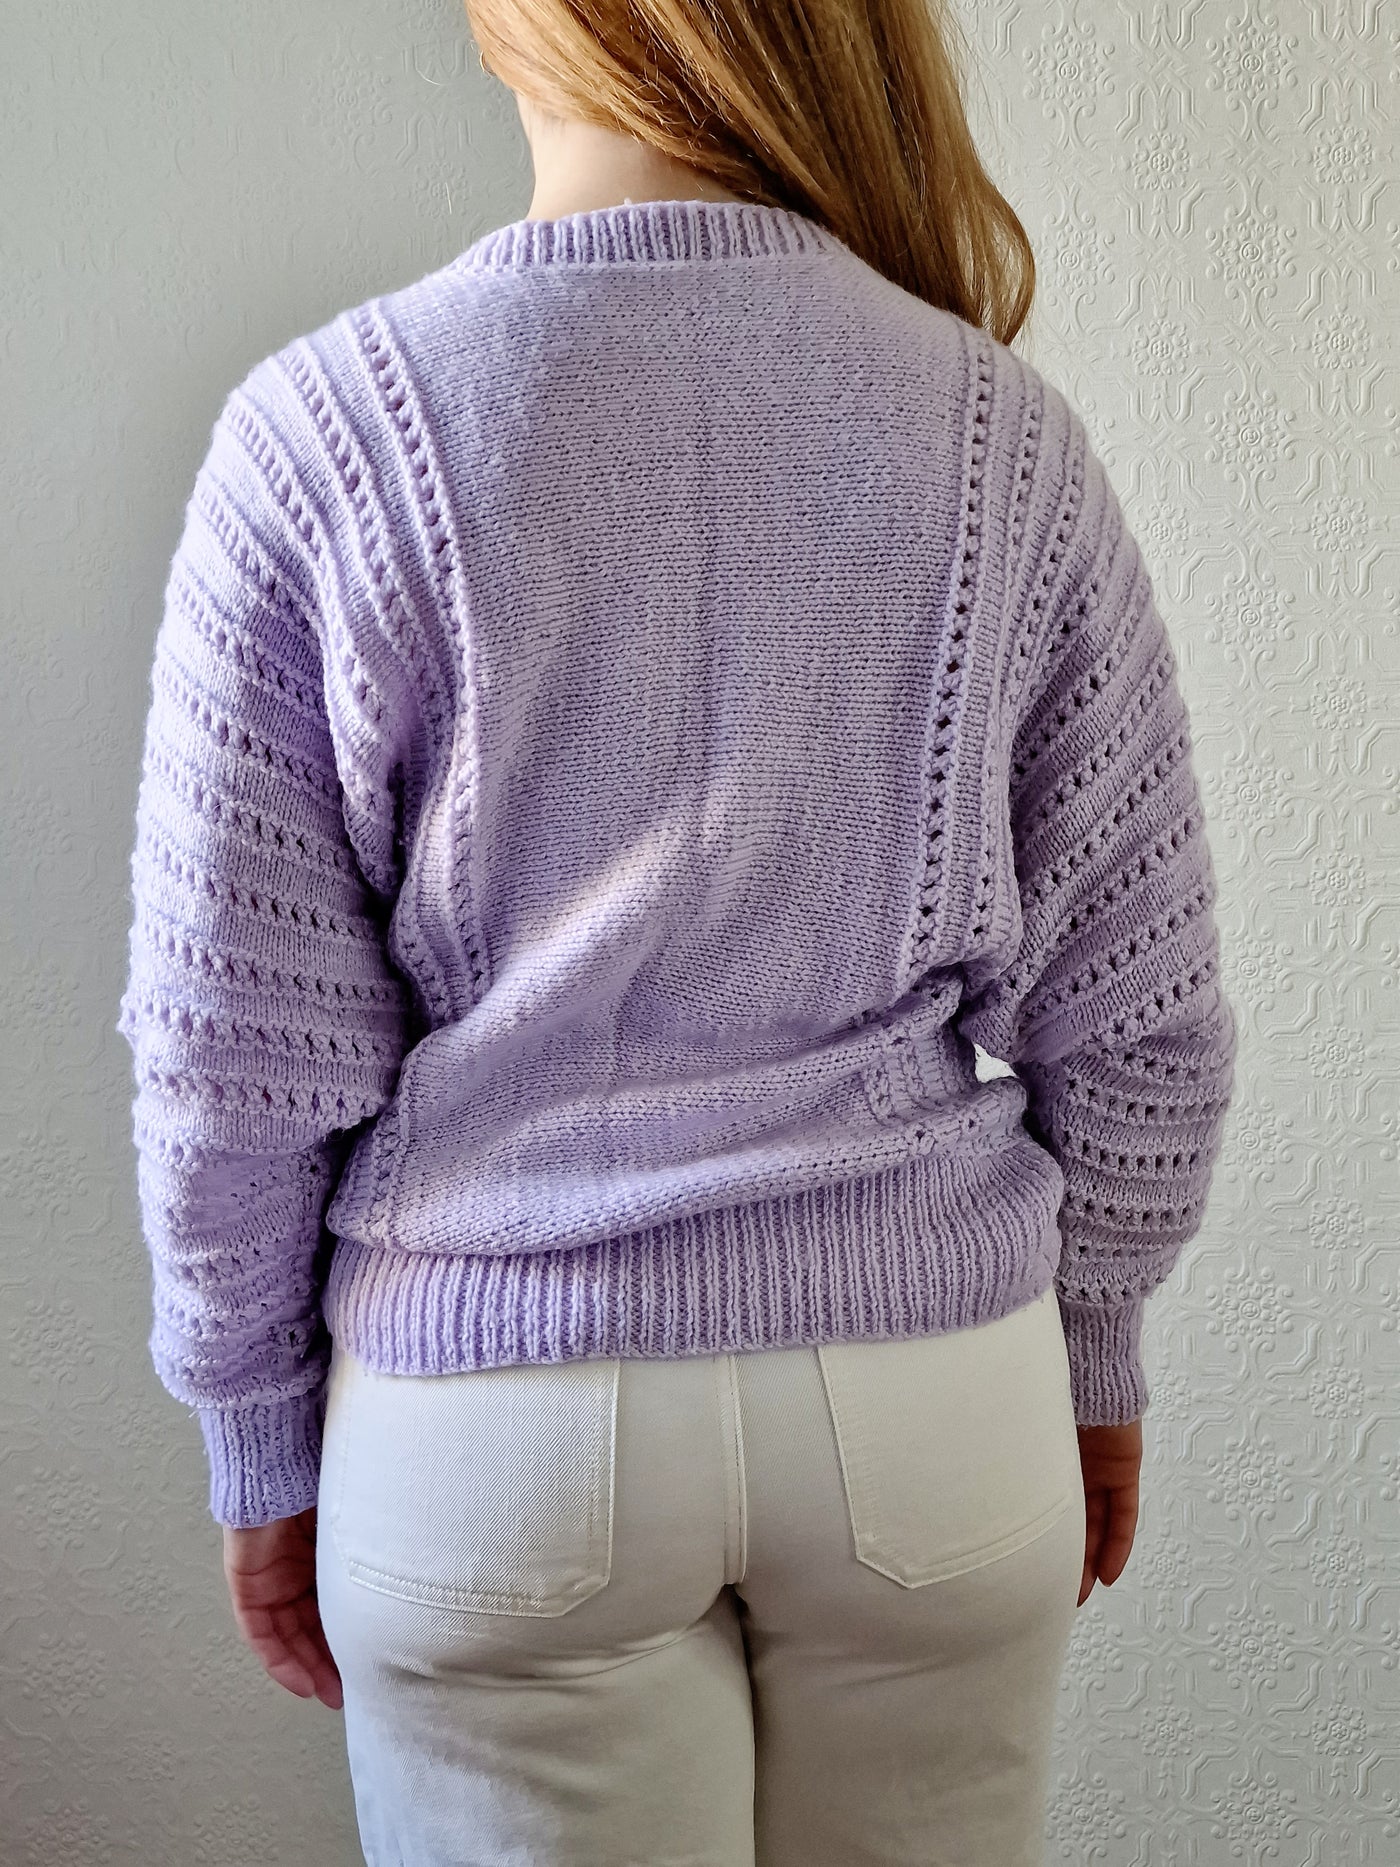 Vintage 80s Handknitted Lilac Purple Batwing Jumper with Crew Neck - S/M